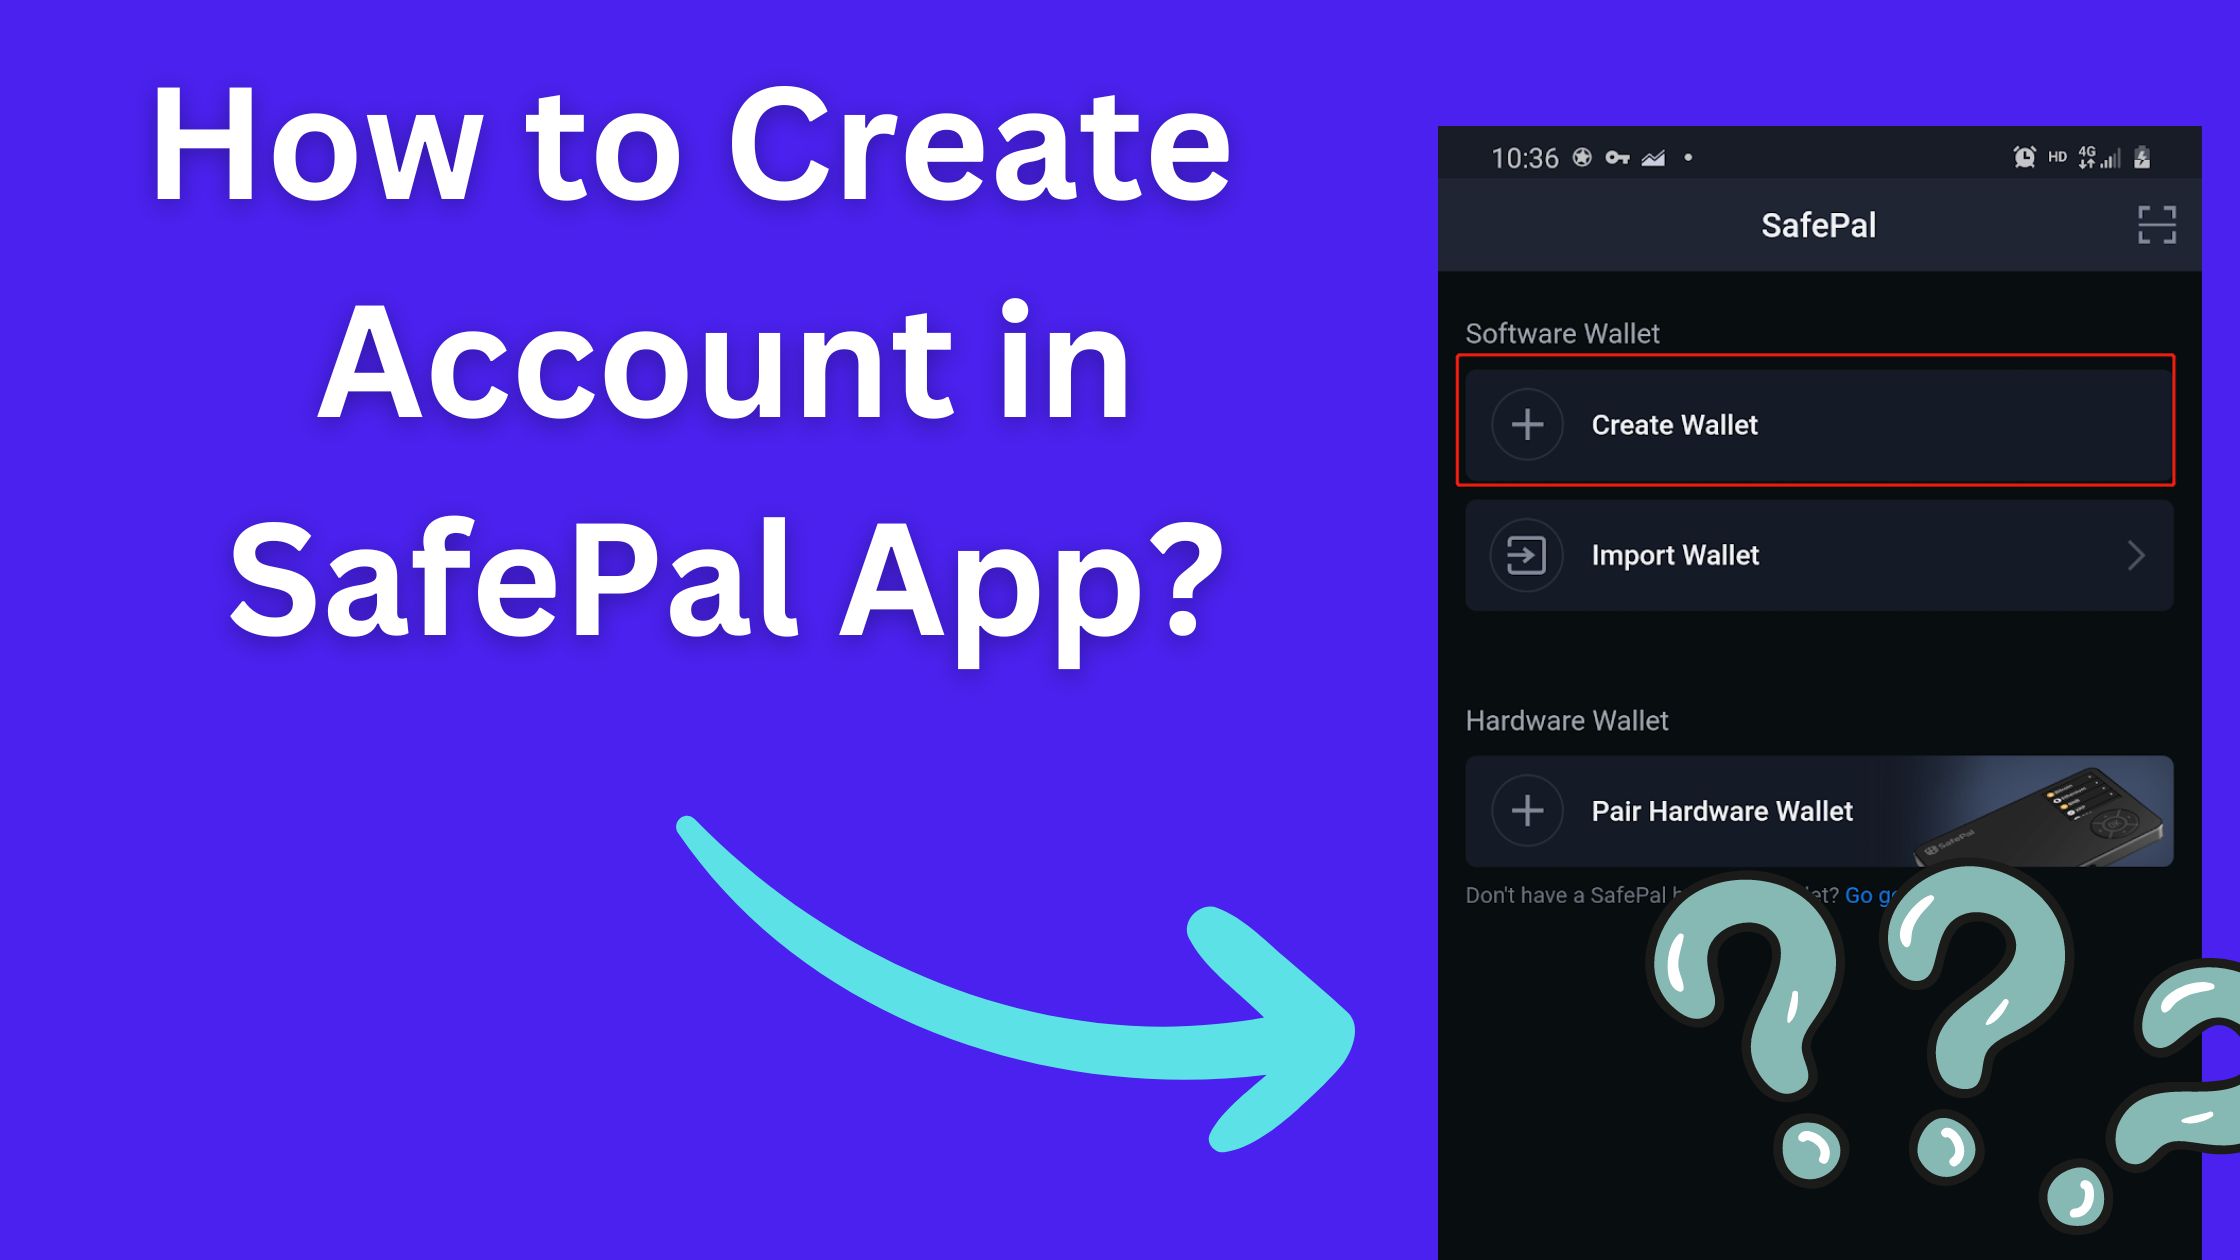 How to Create an Account in SafePal App